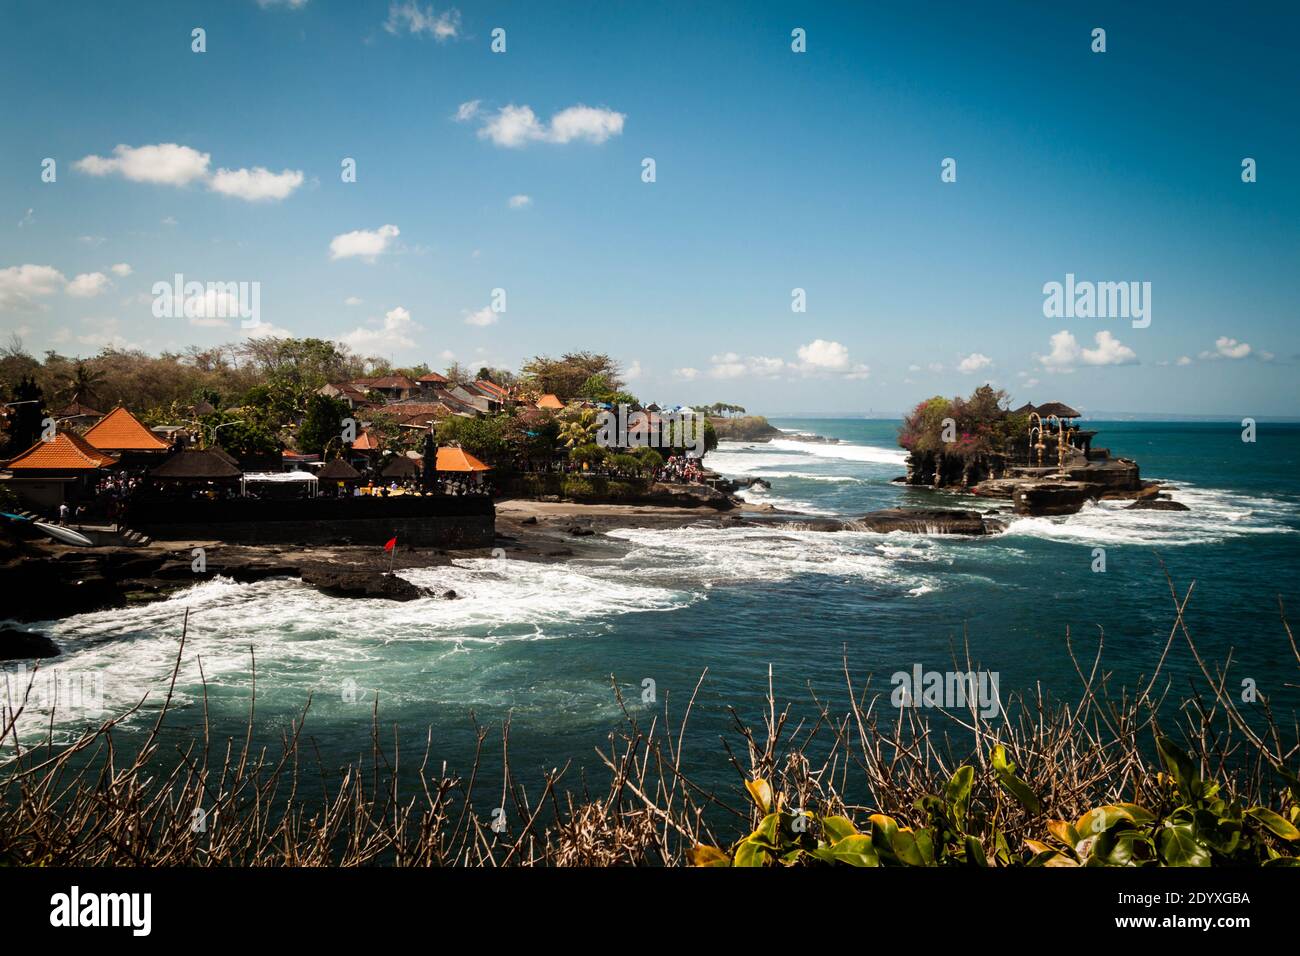 Tanah Lot Temple in the wavy ocean and the restaurants on the coast Stock Photo